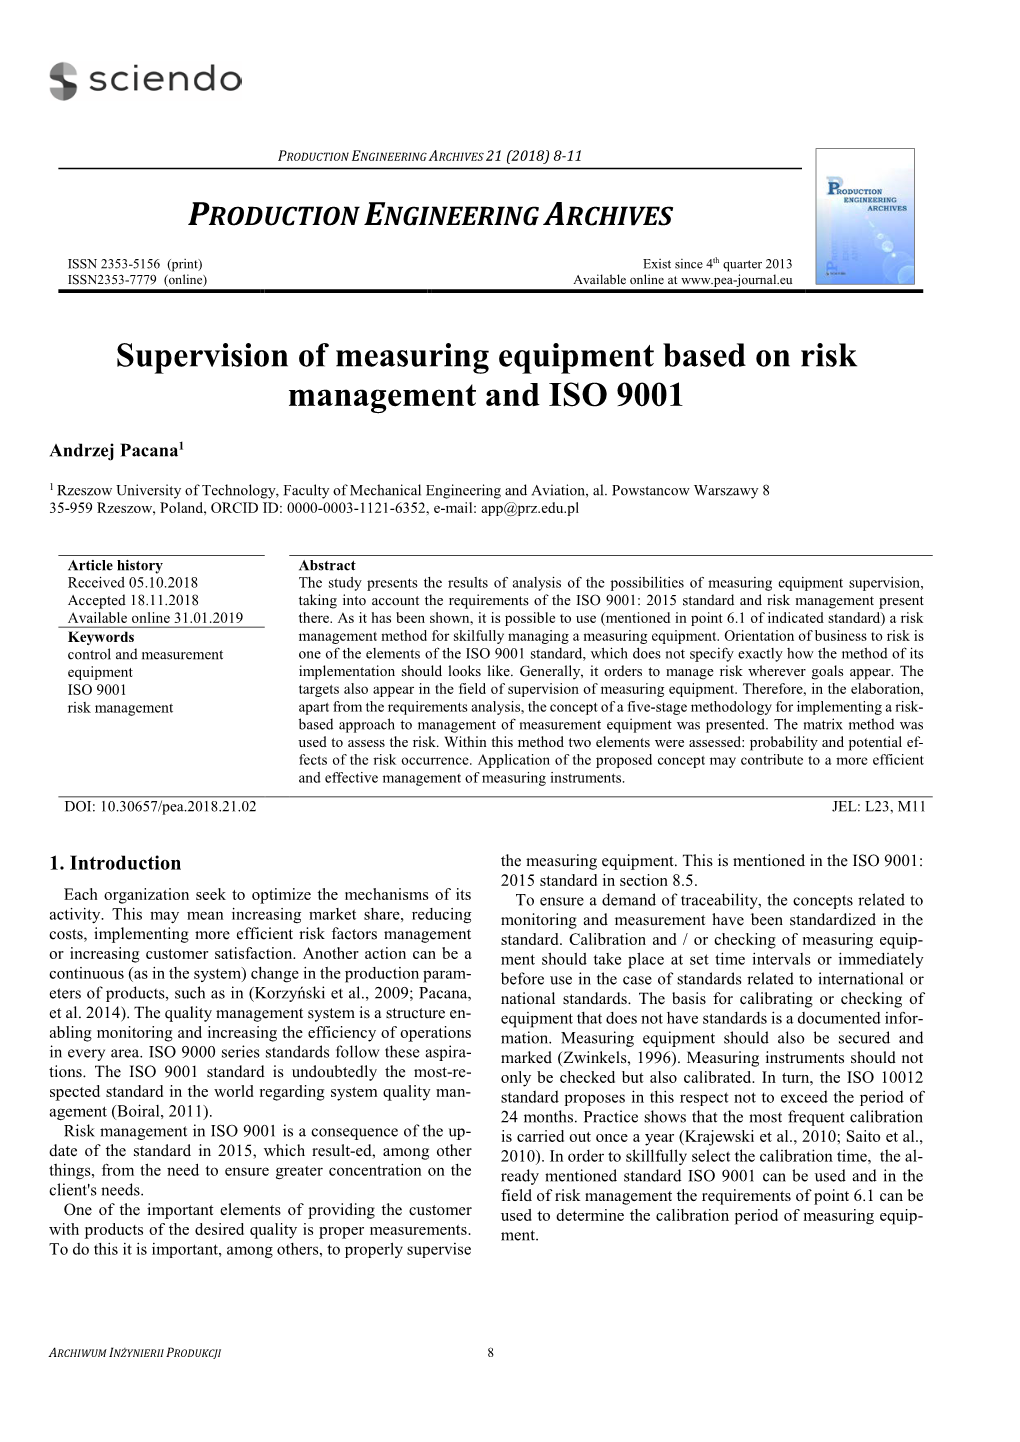 Supervision of Measuring Equipment Based on Risk Management and ISO 9001